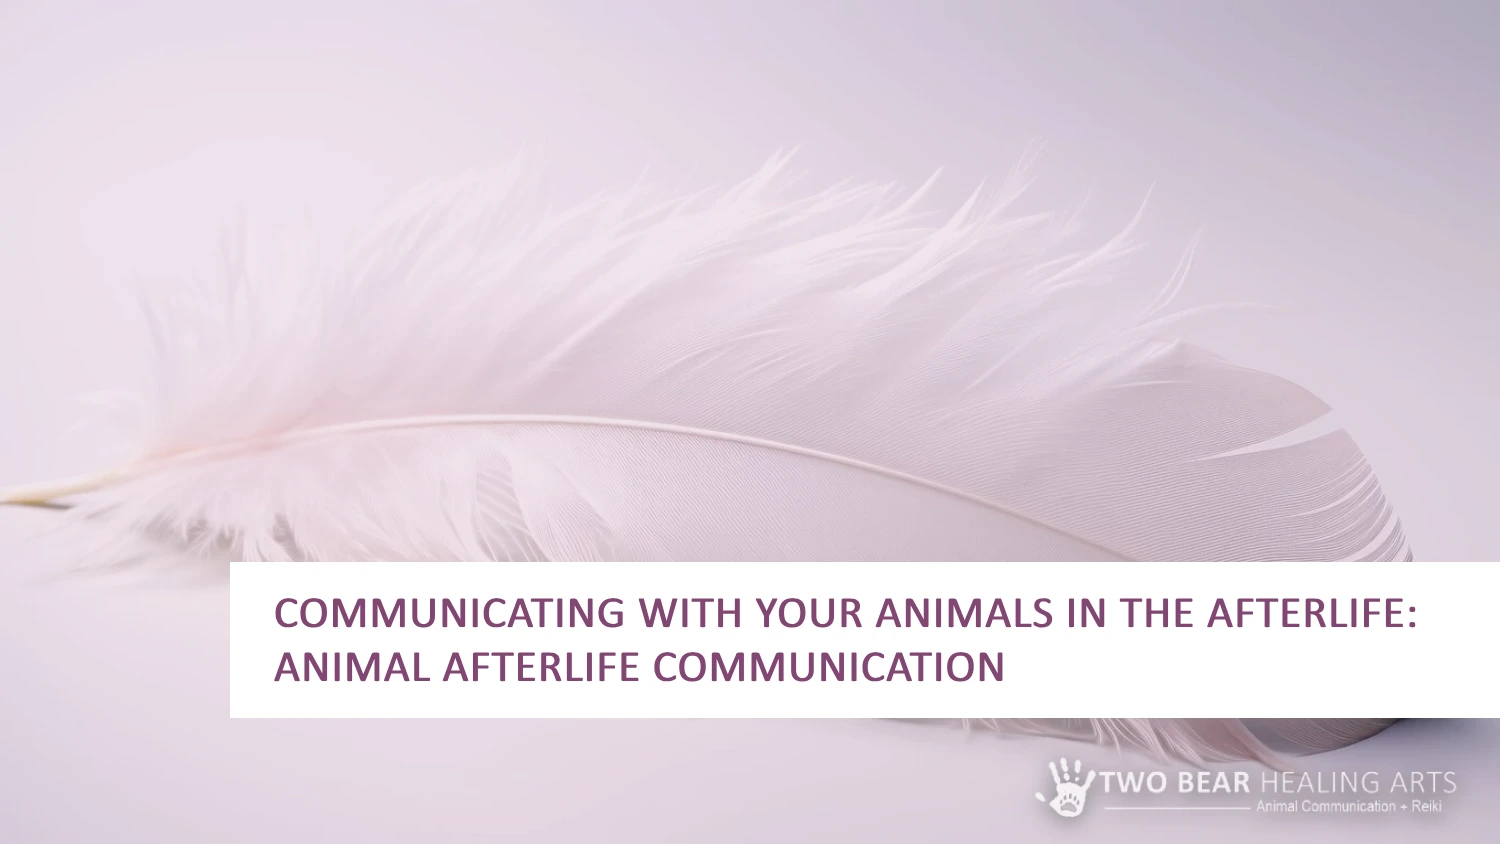 Finding solace after pet loss. Image of a feather, symbolizing an angel's wing or spiritual connection, promotes animal afterlife communication sessions to connect with your departed pet.